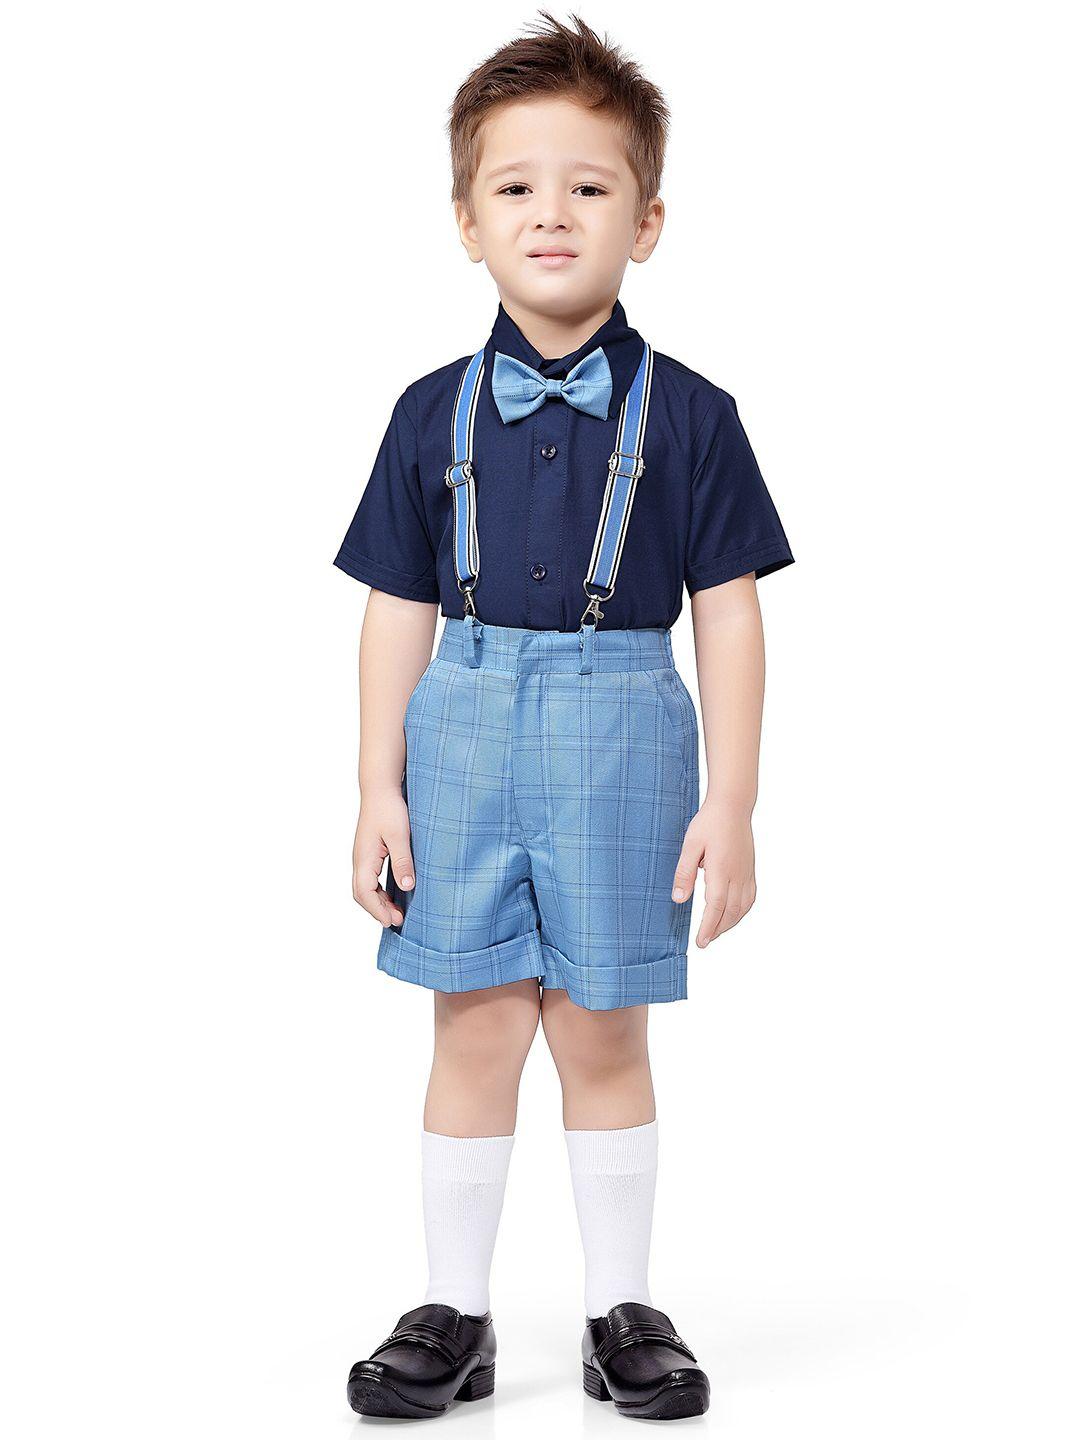 jeetethnics-boys-blue-&-navy-blue-shirt-with-checked-shorts-with-suspender-&-bow-set